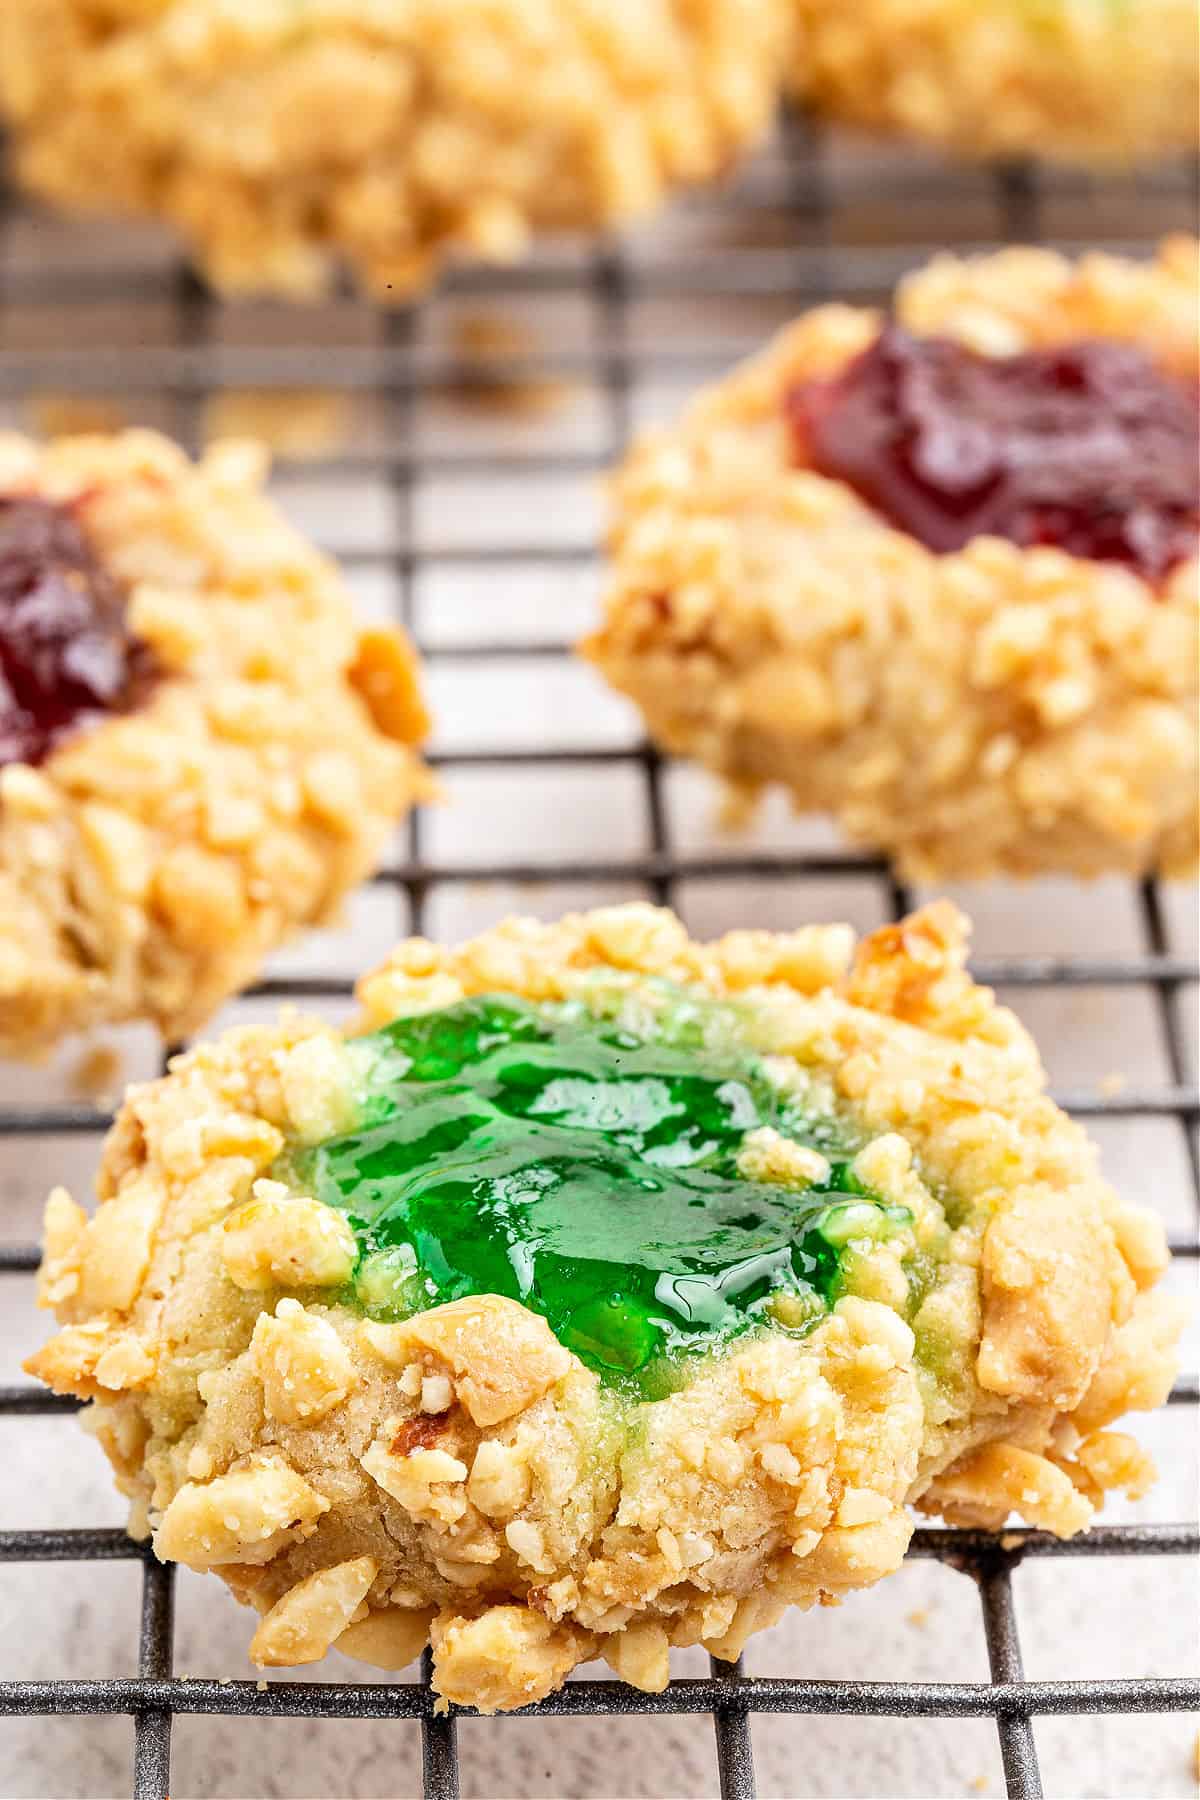 Thumbprint cookies filled with red and green jam.